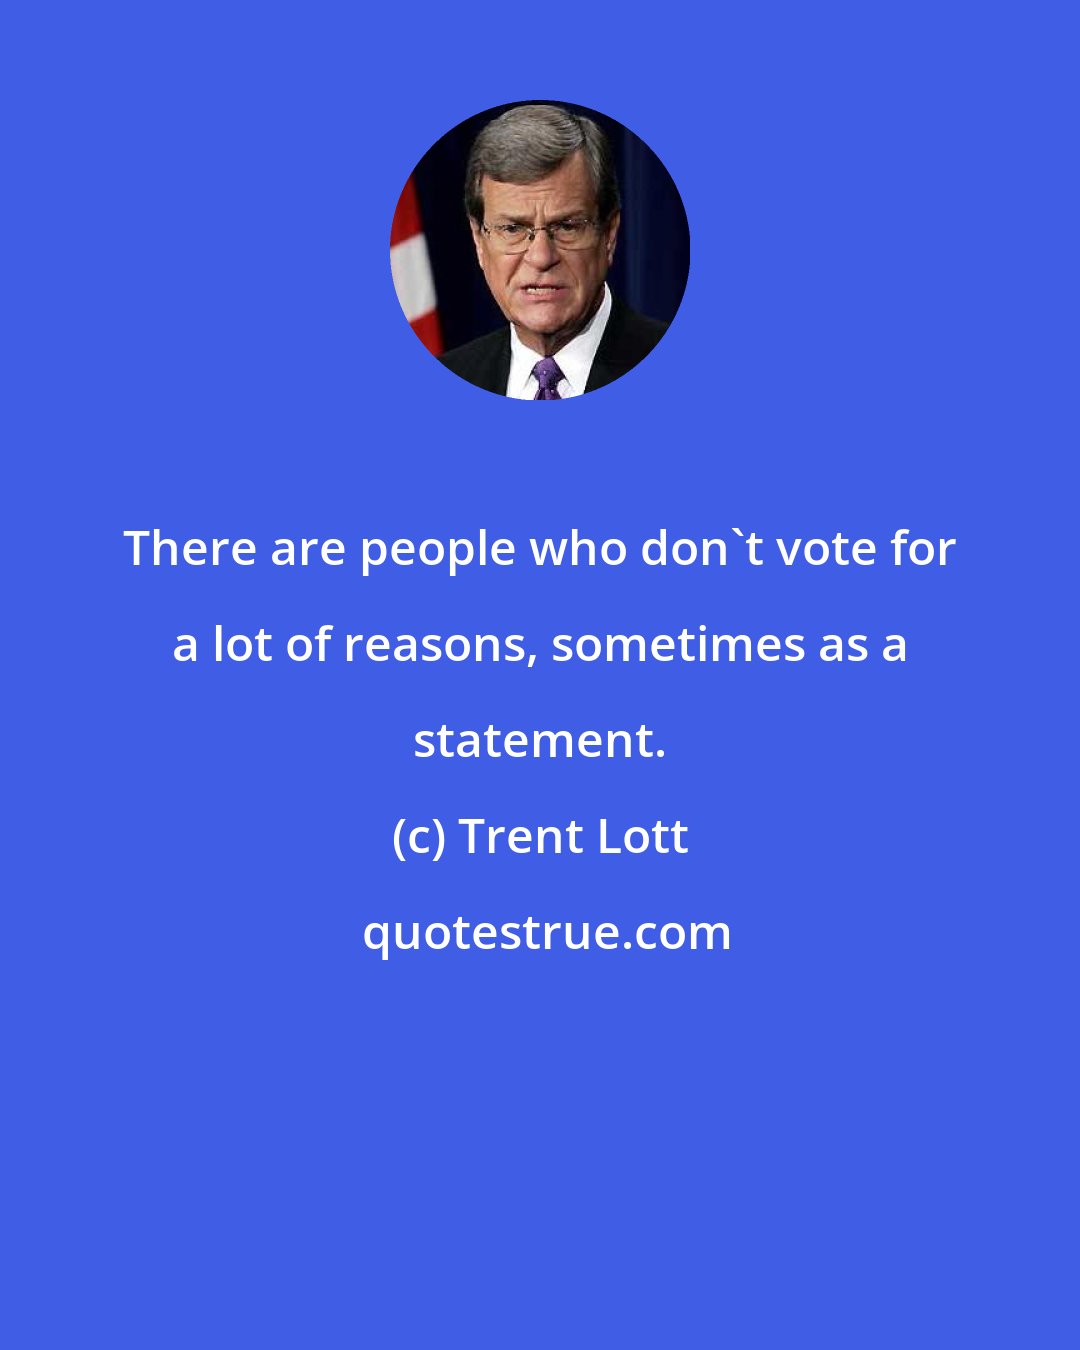 Trent Lott: There are people who don't vote for a lot of reasons, sometimes as a statement.